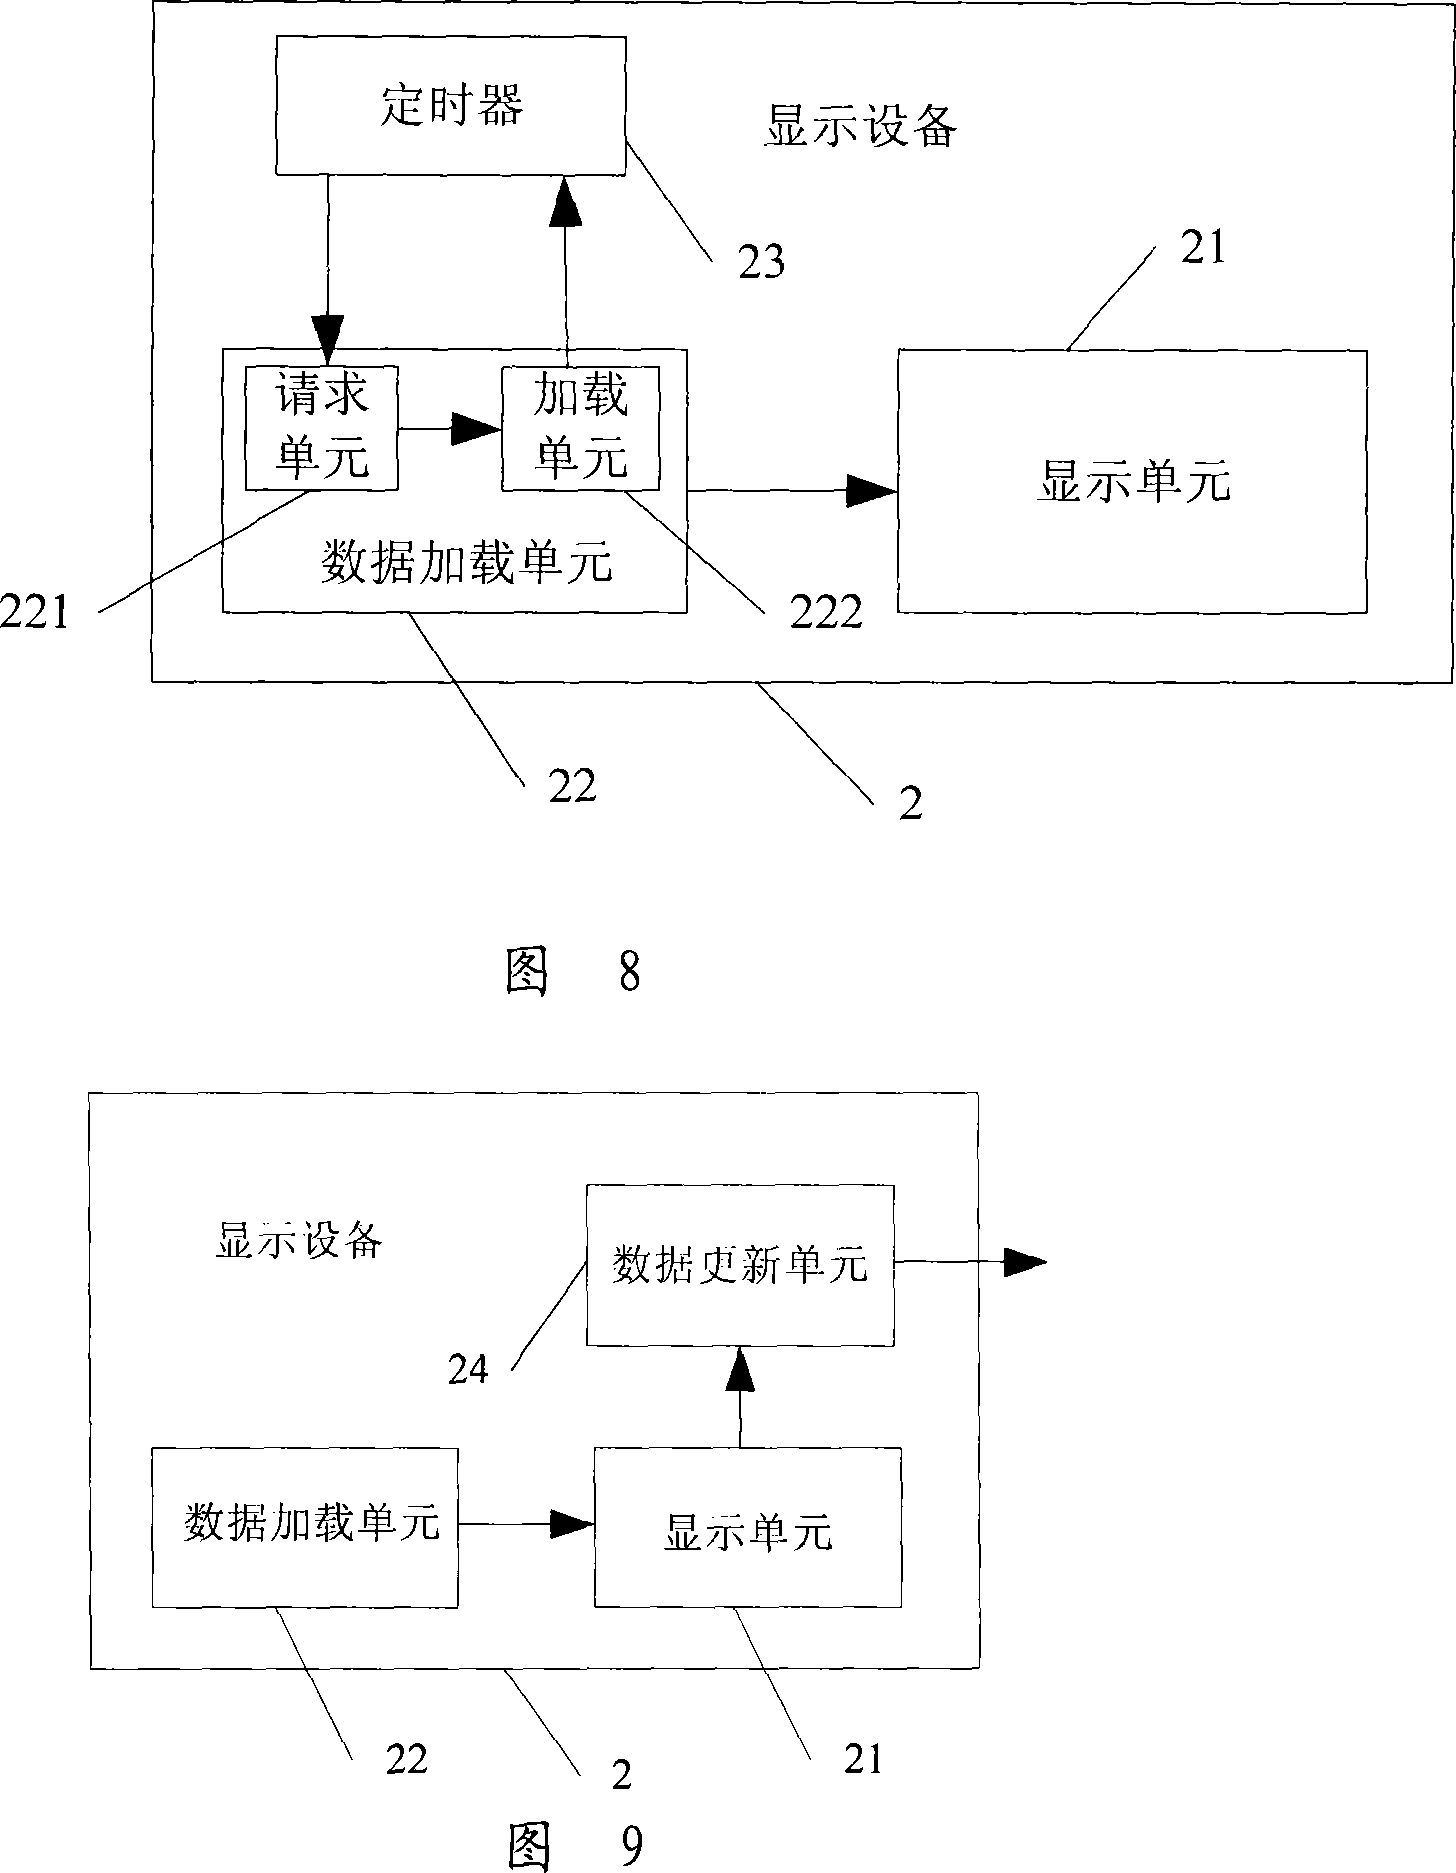 Topological diagram display process, system and device